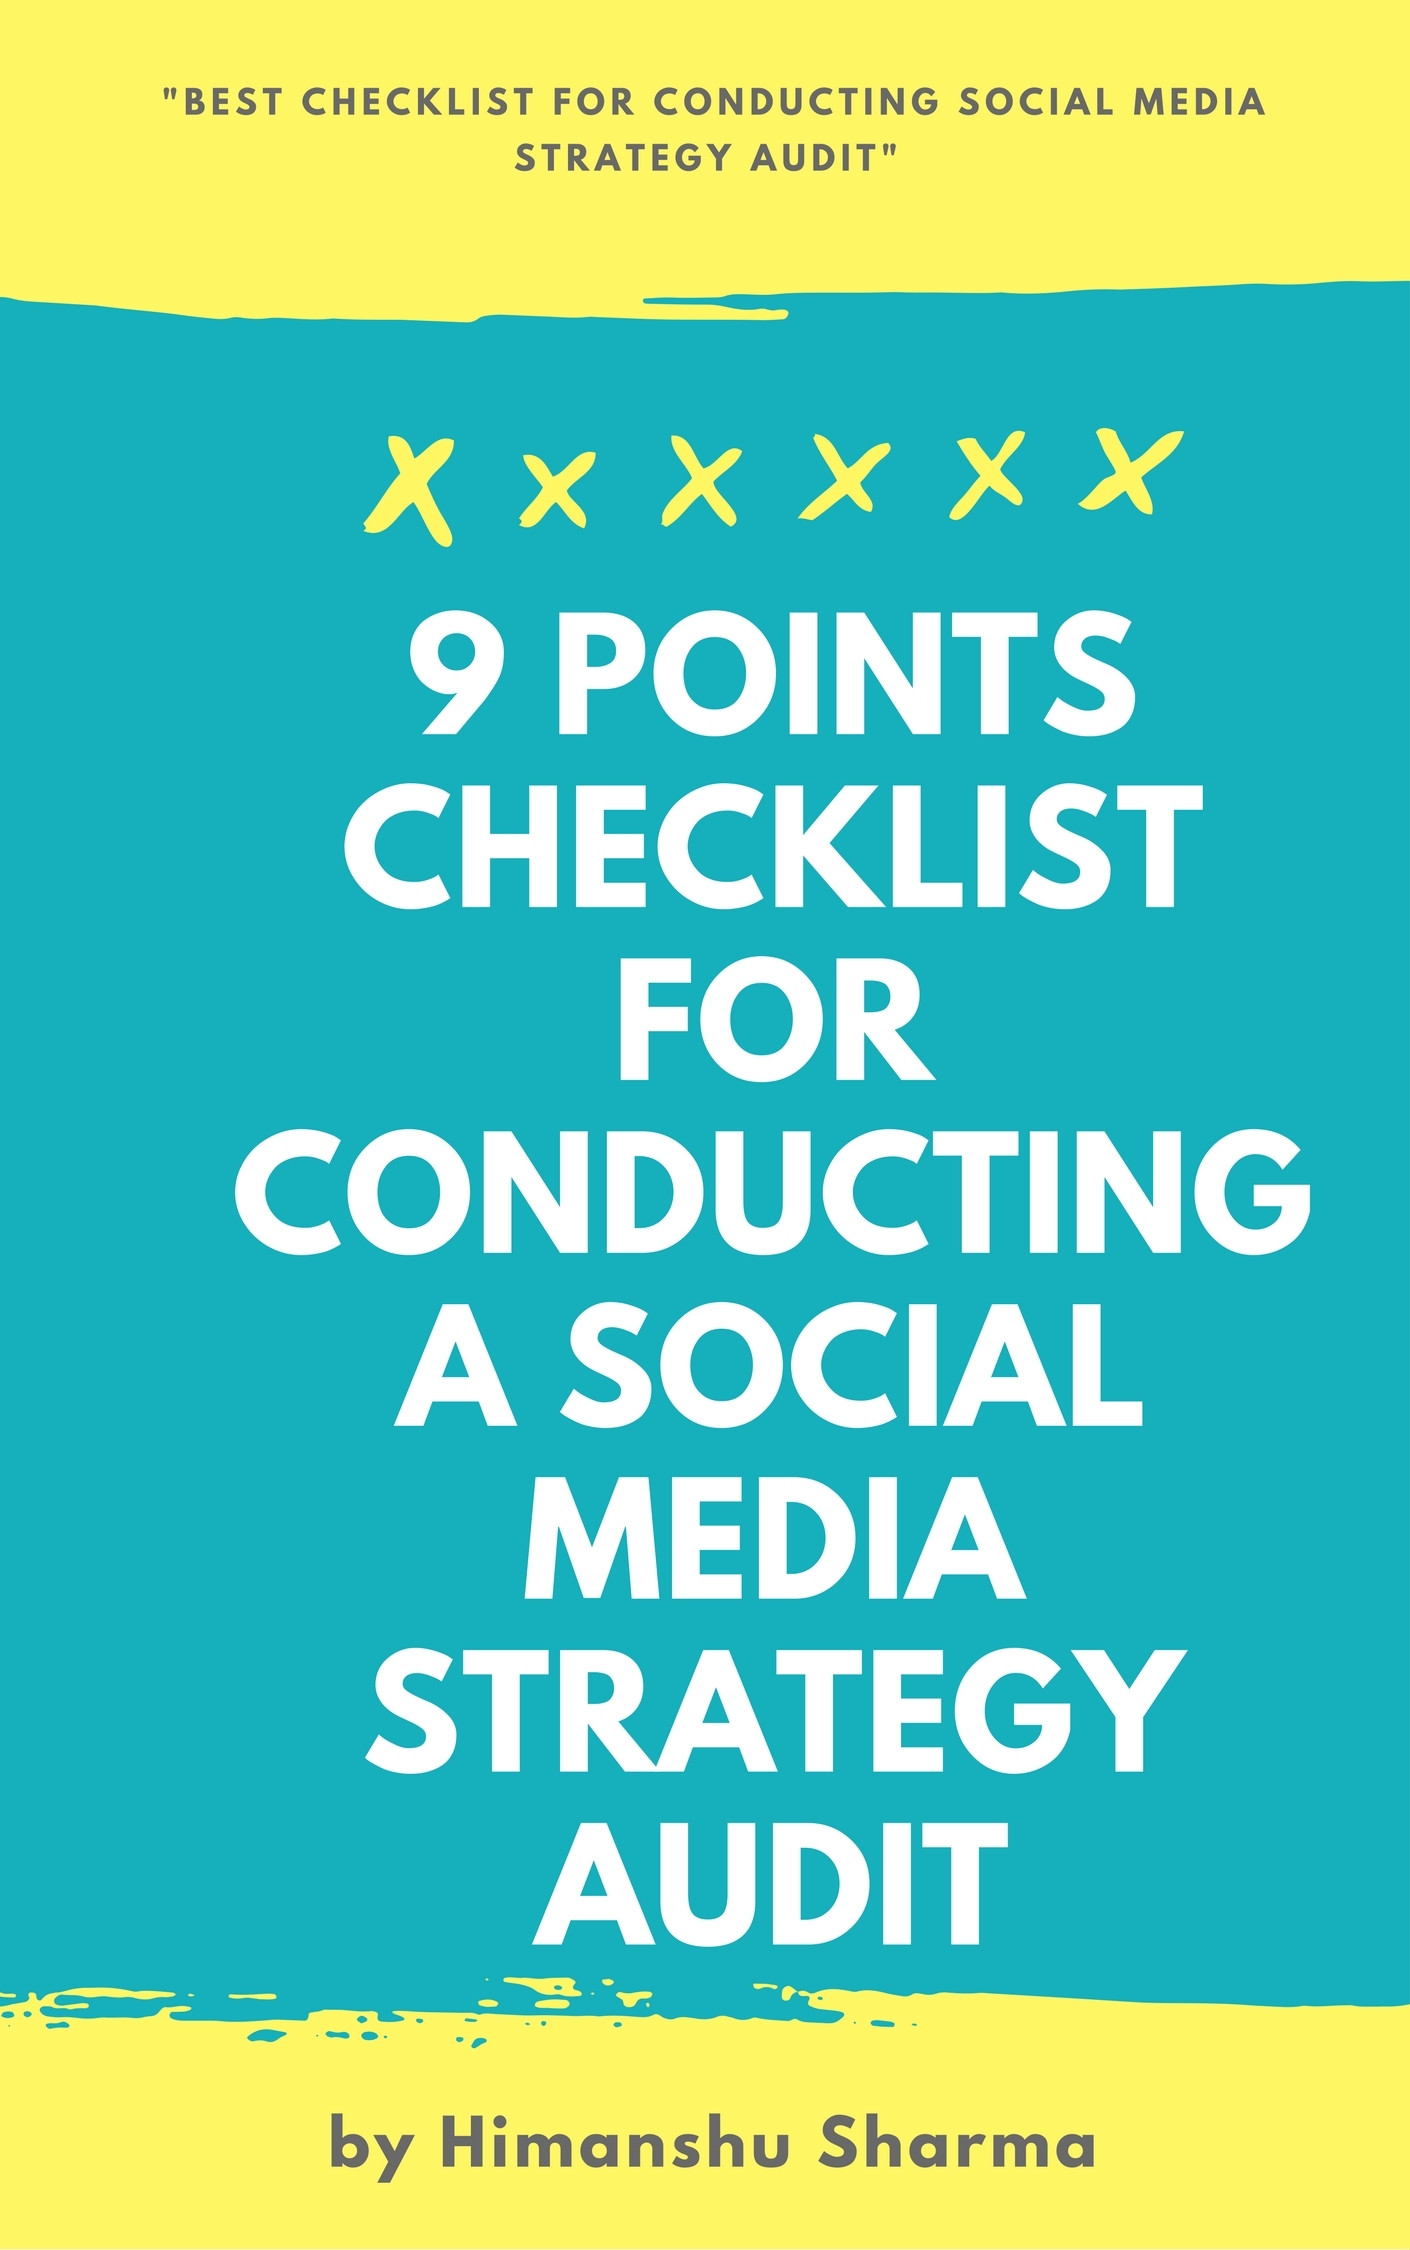 9 Points Checklist For Conducting A Social Media Strategy Audit